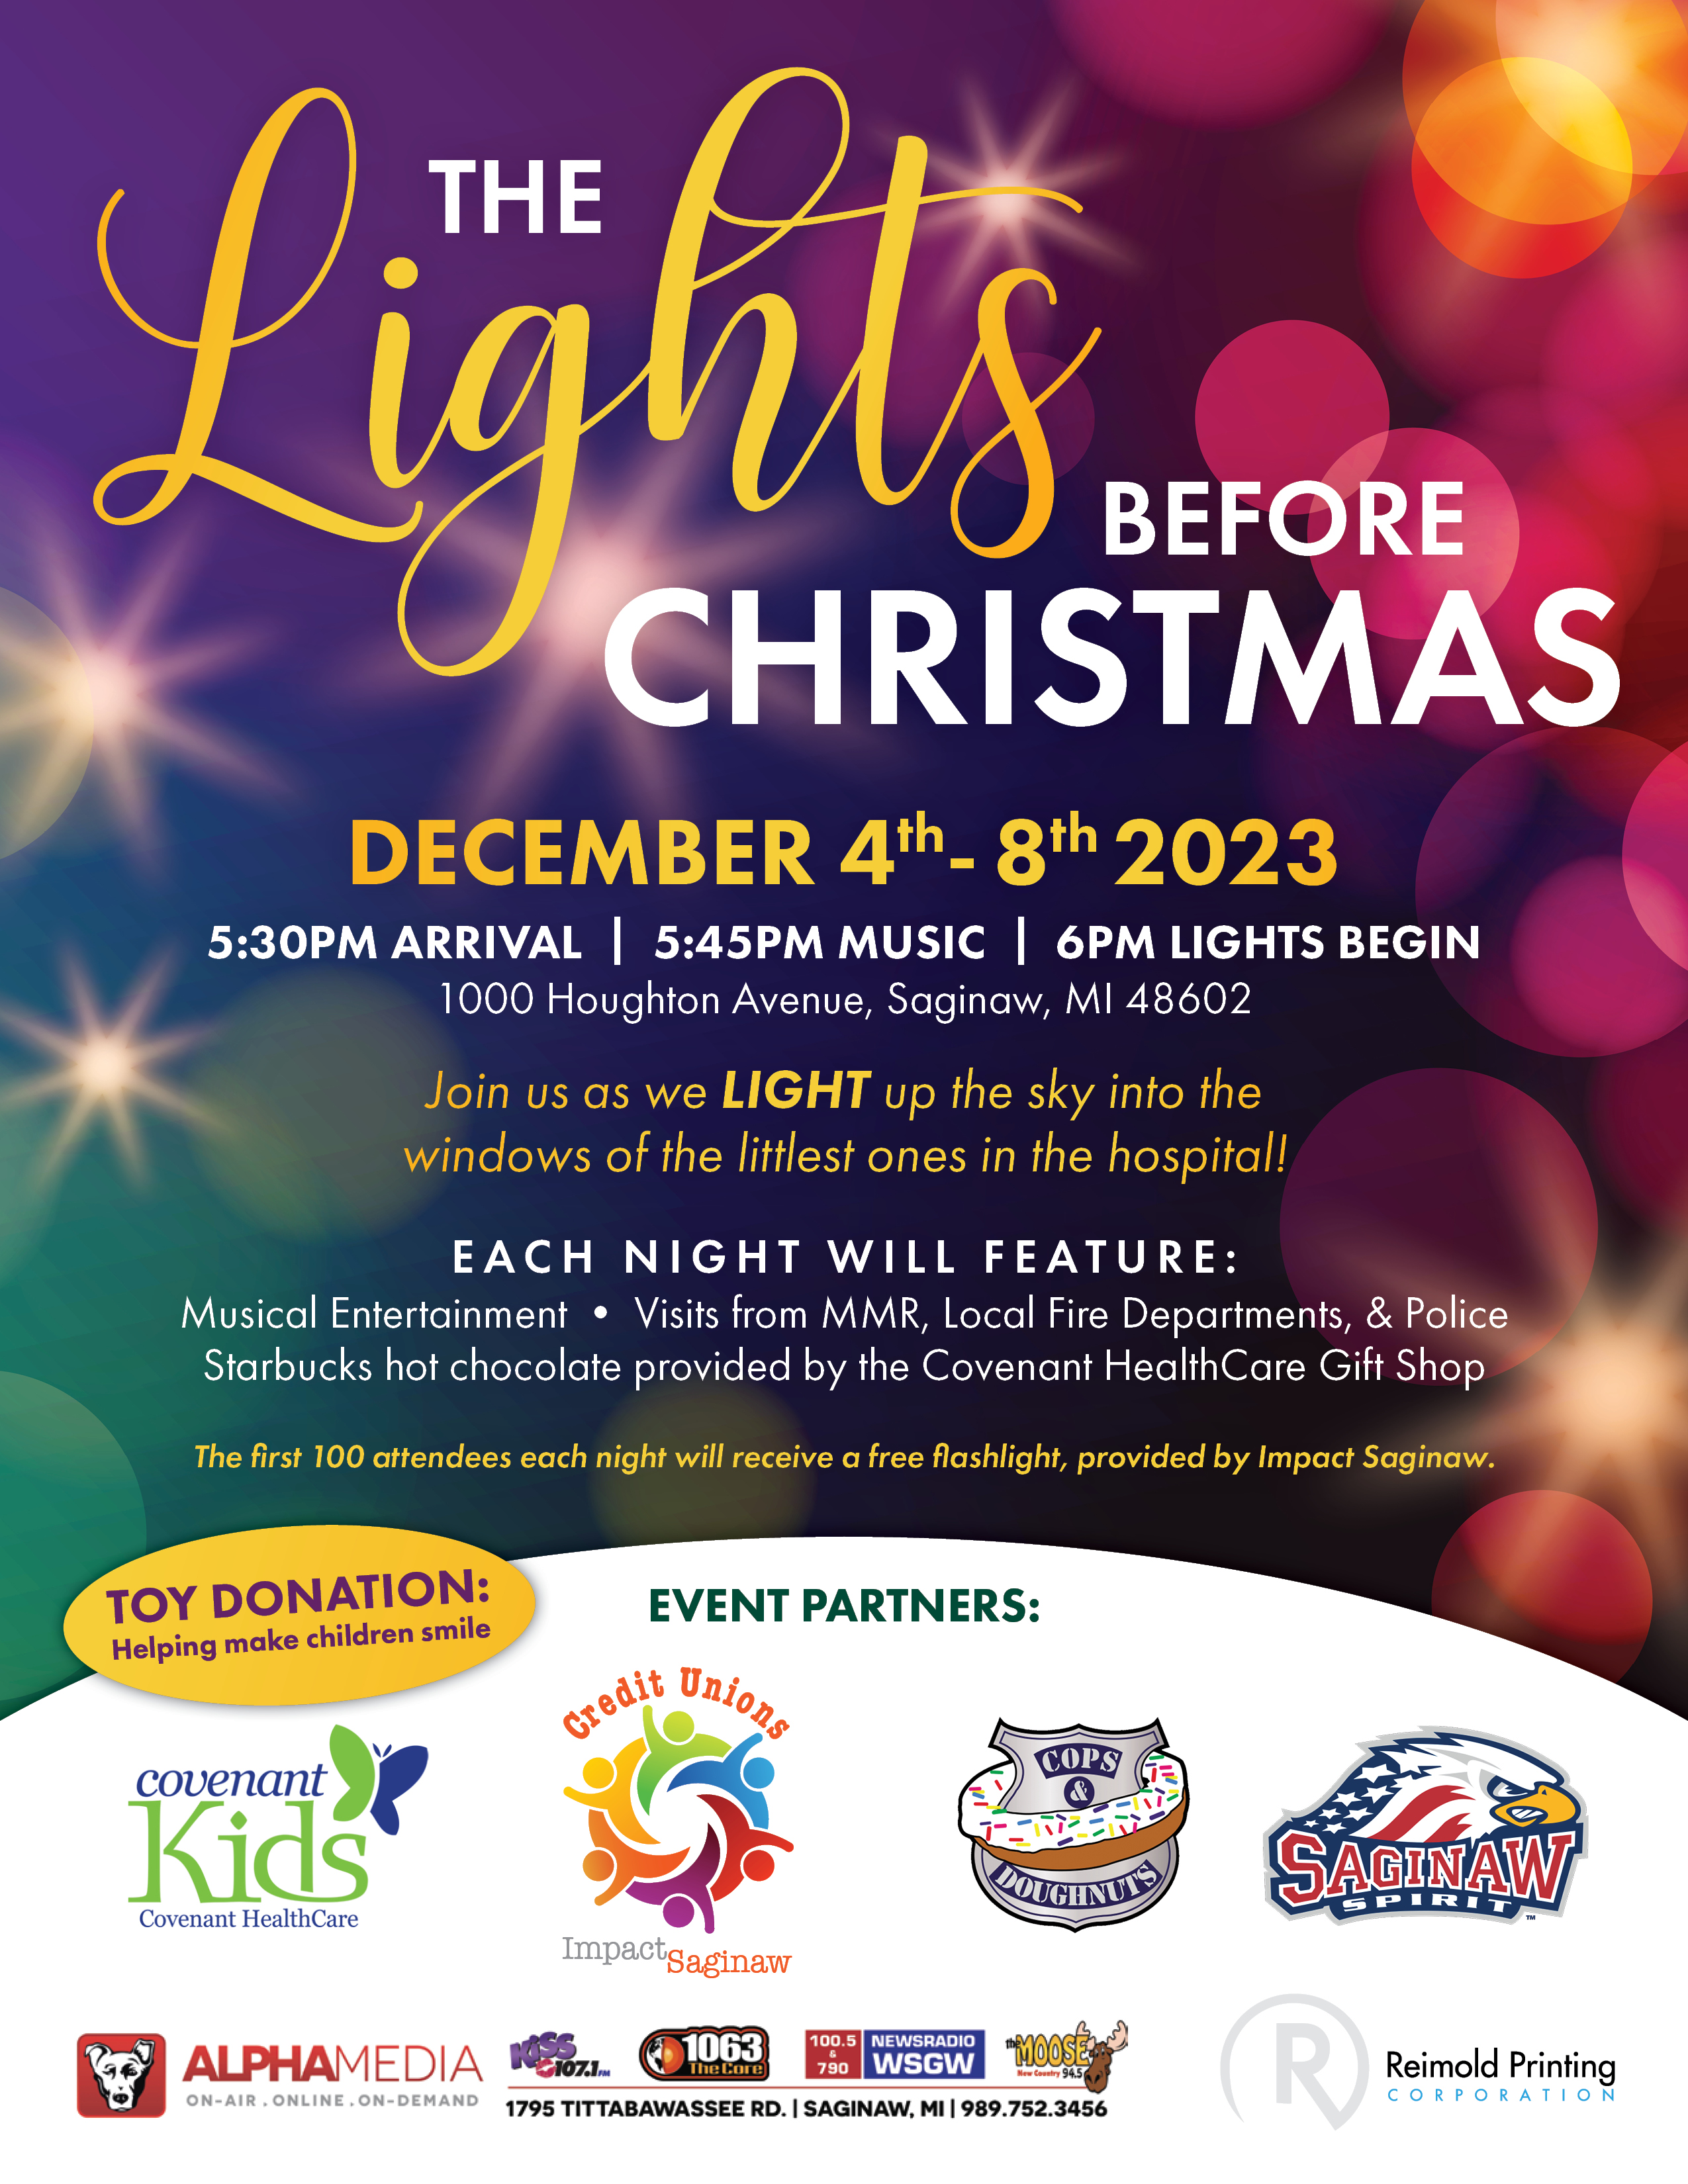 The Lights before Christmas. December 4-8th 2023.